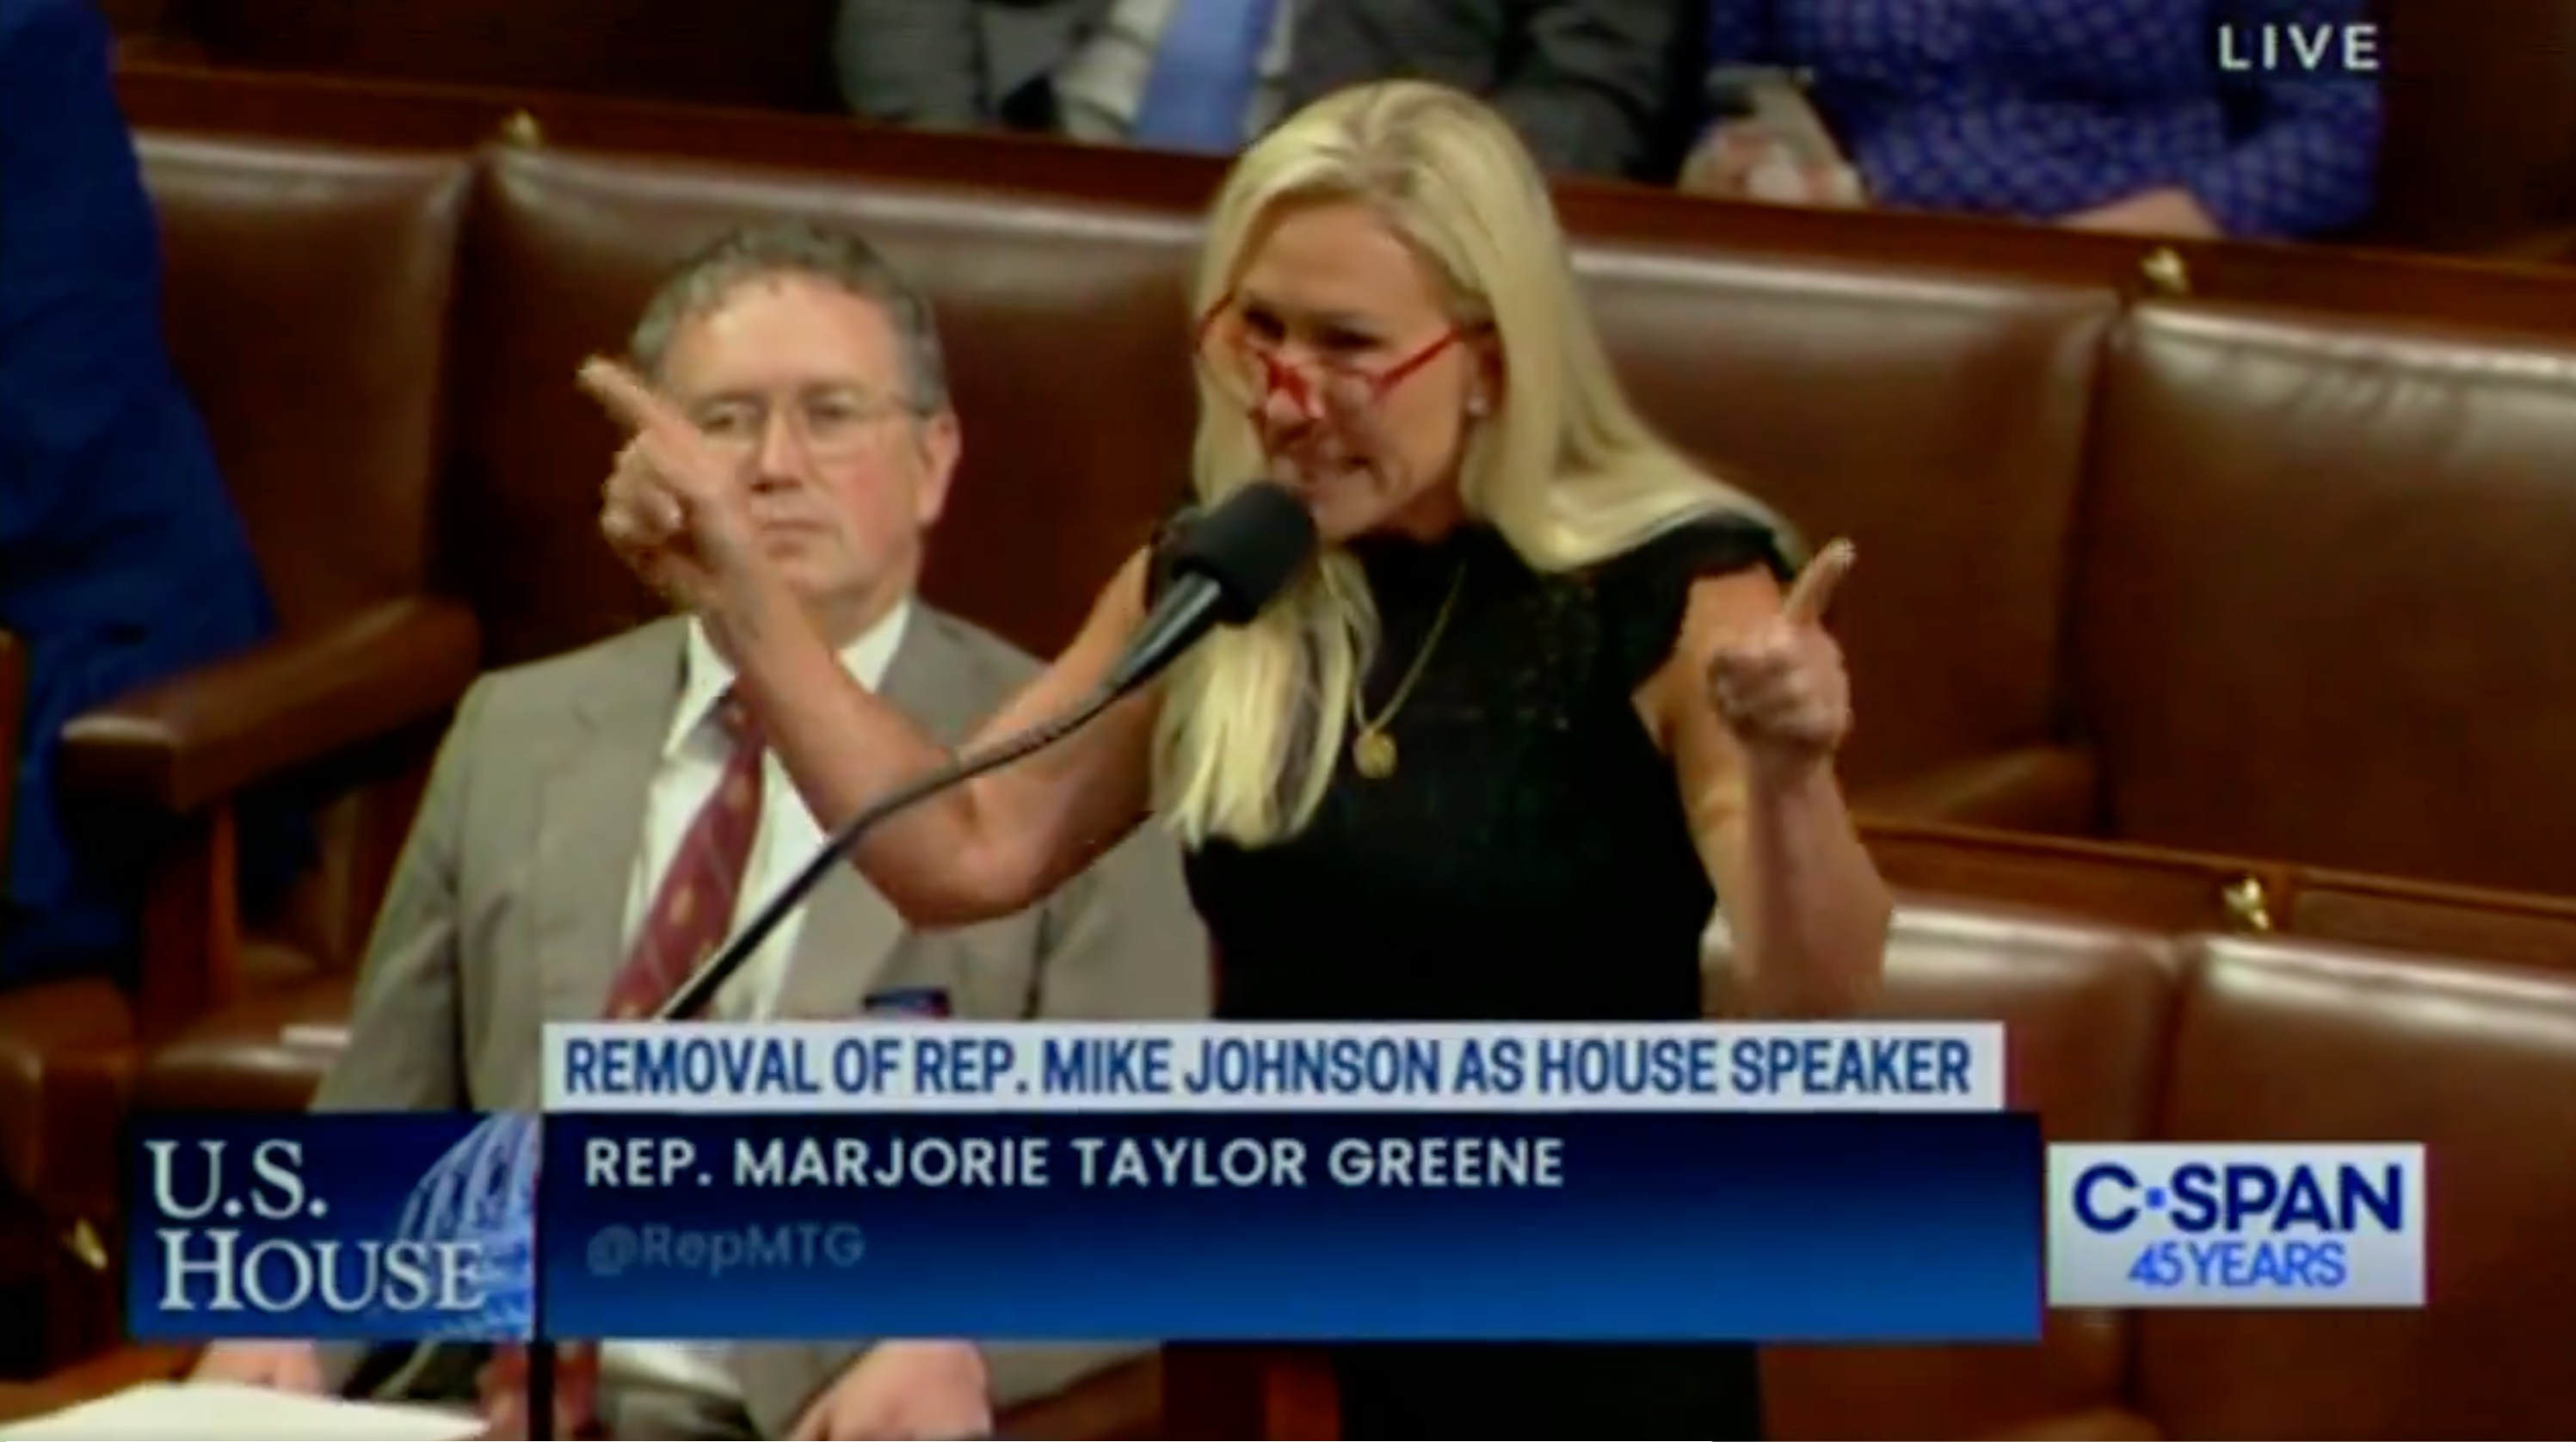 Marjorie Taylor Greene, pictured speaking on the House floor on Wednesday, was defeated when she attempted to remove Speaker Mike Johnson